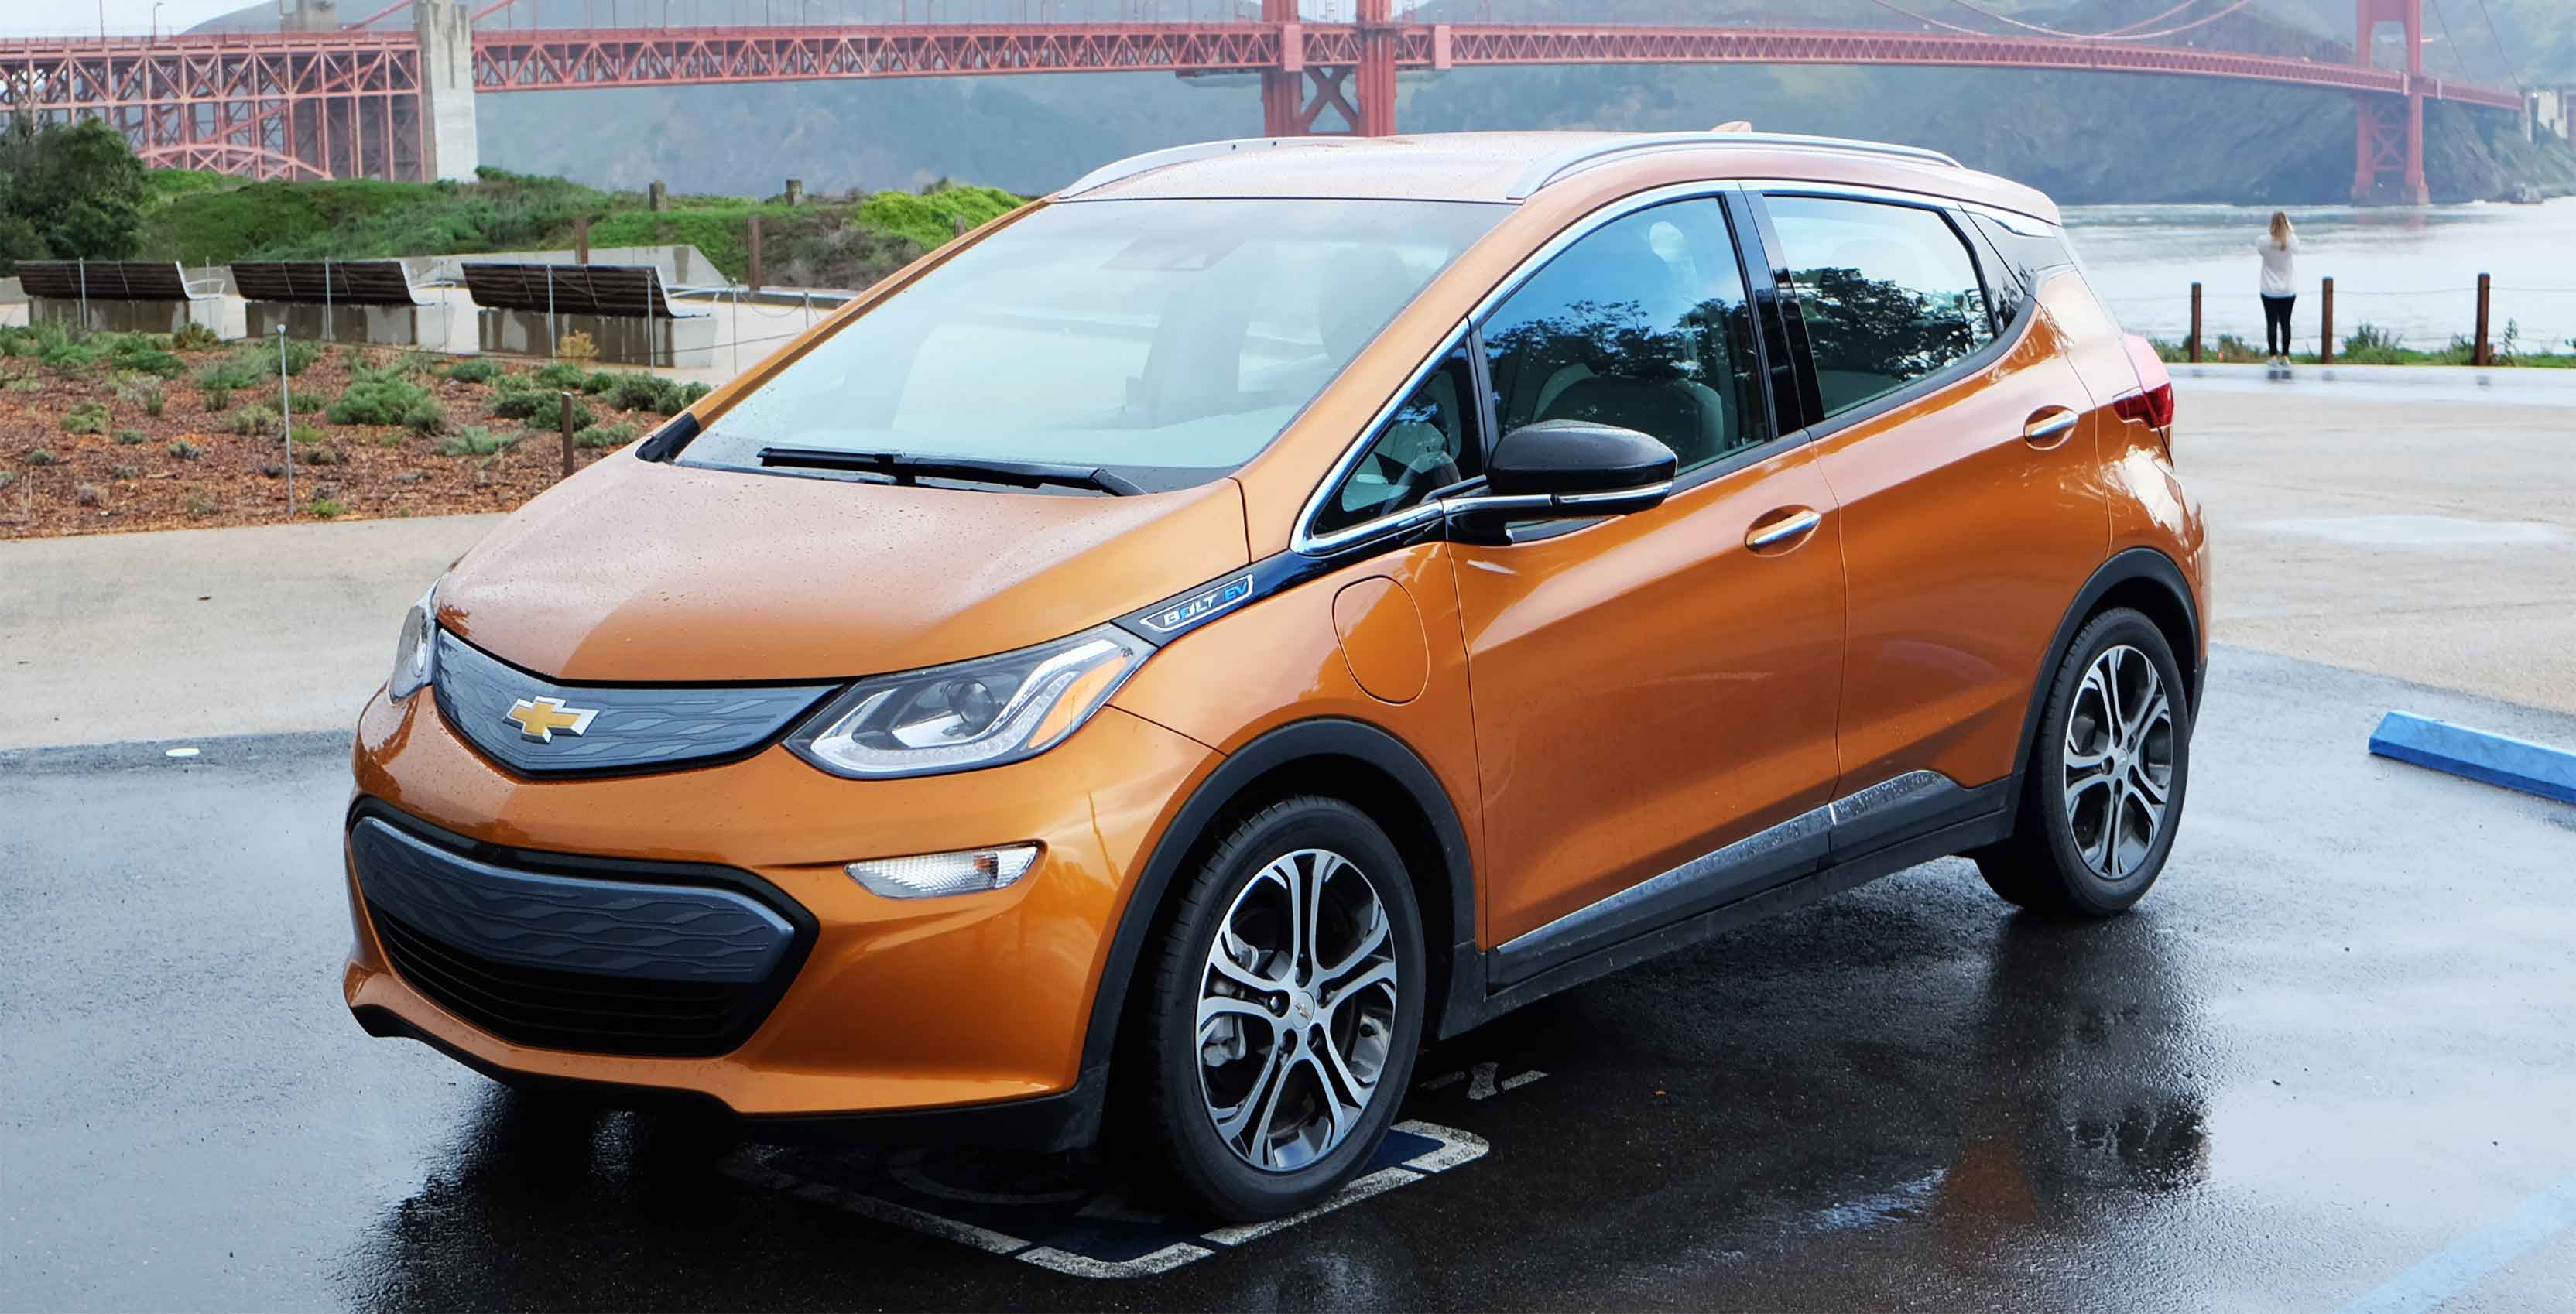 Chevy Bolt used as base for the AutoDrive Challenge